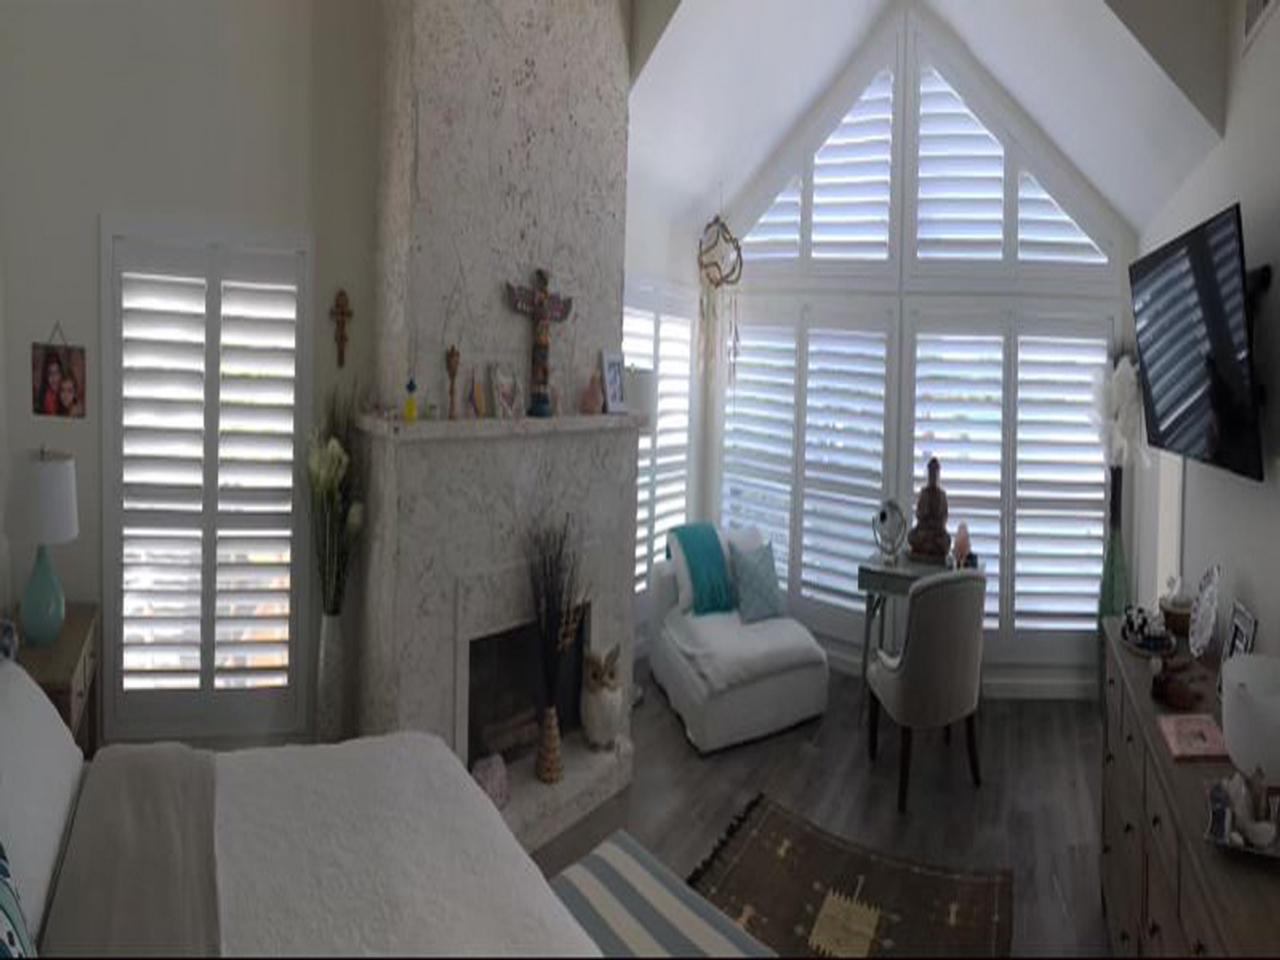 Bedroom with shutters on slant top windows